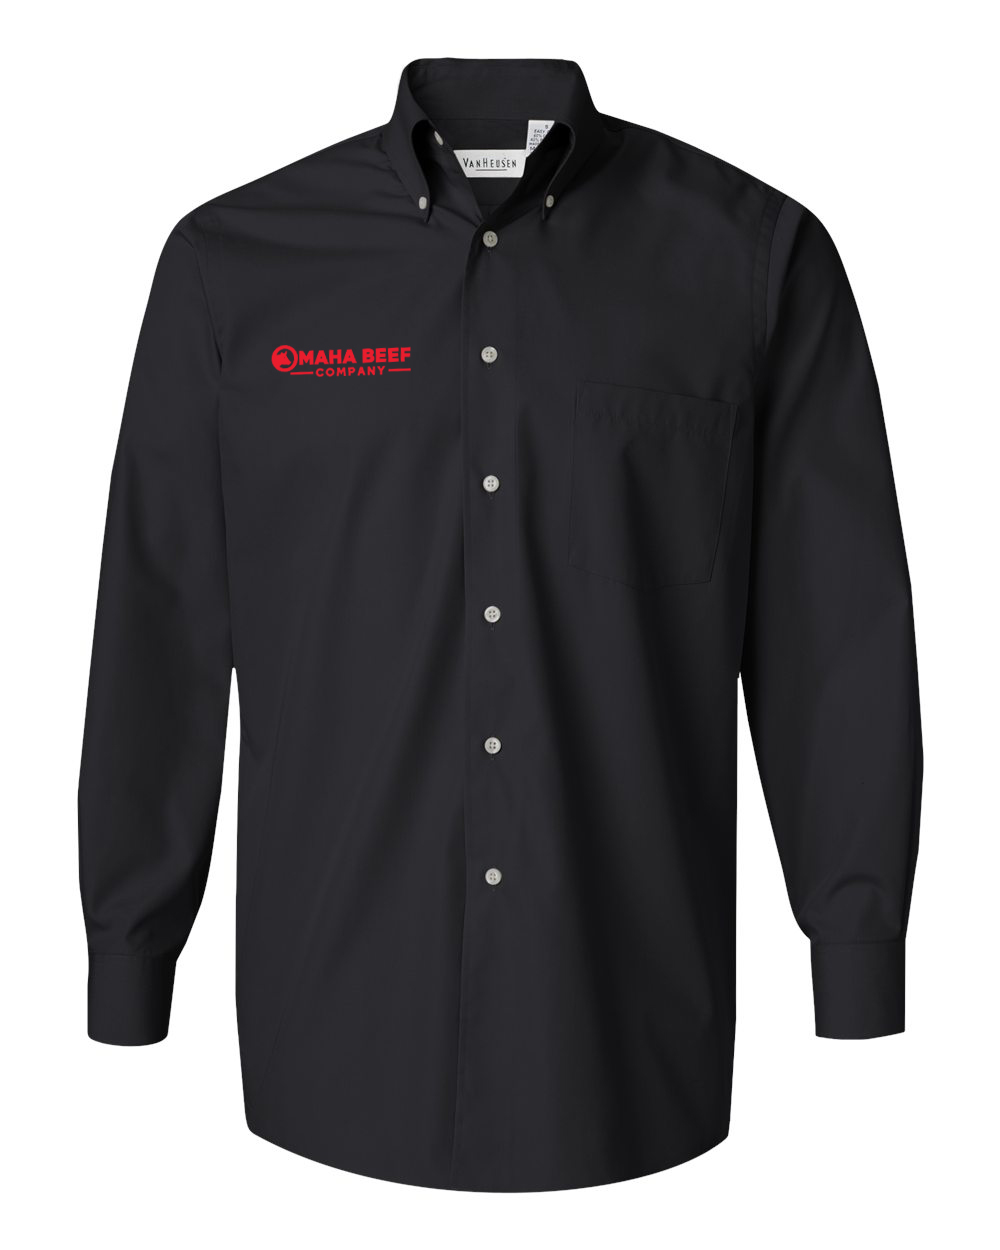 BAW Athletic Wear 3000 - Adult Long Sleeve Fishing Shirt $26.25 - Woven ...